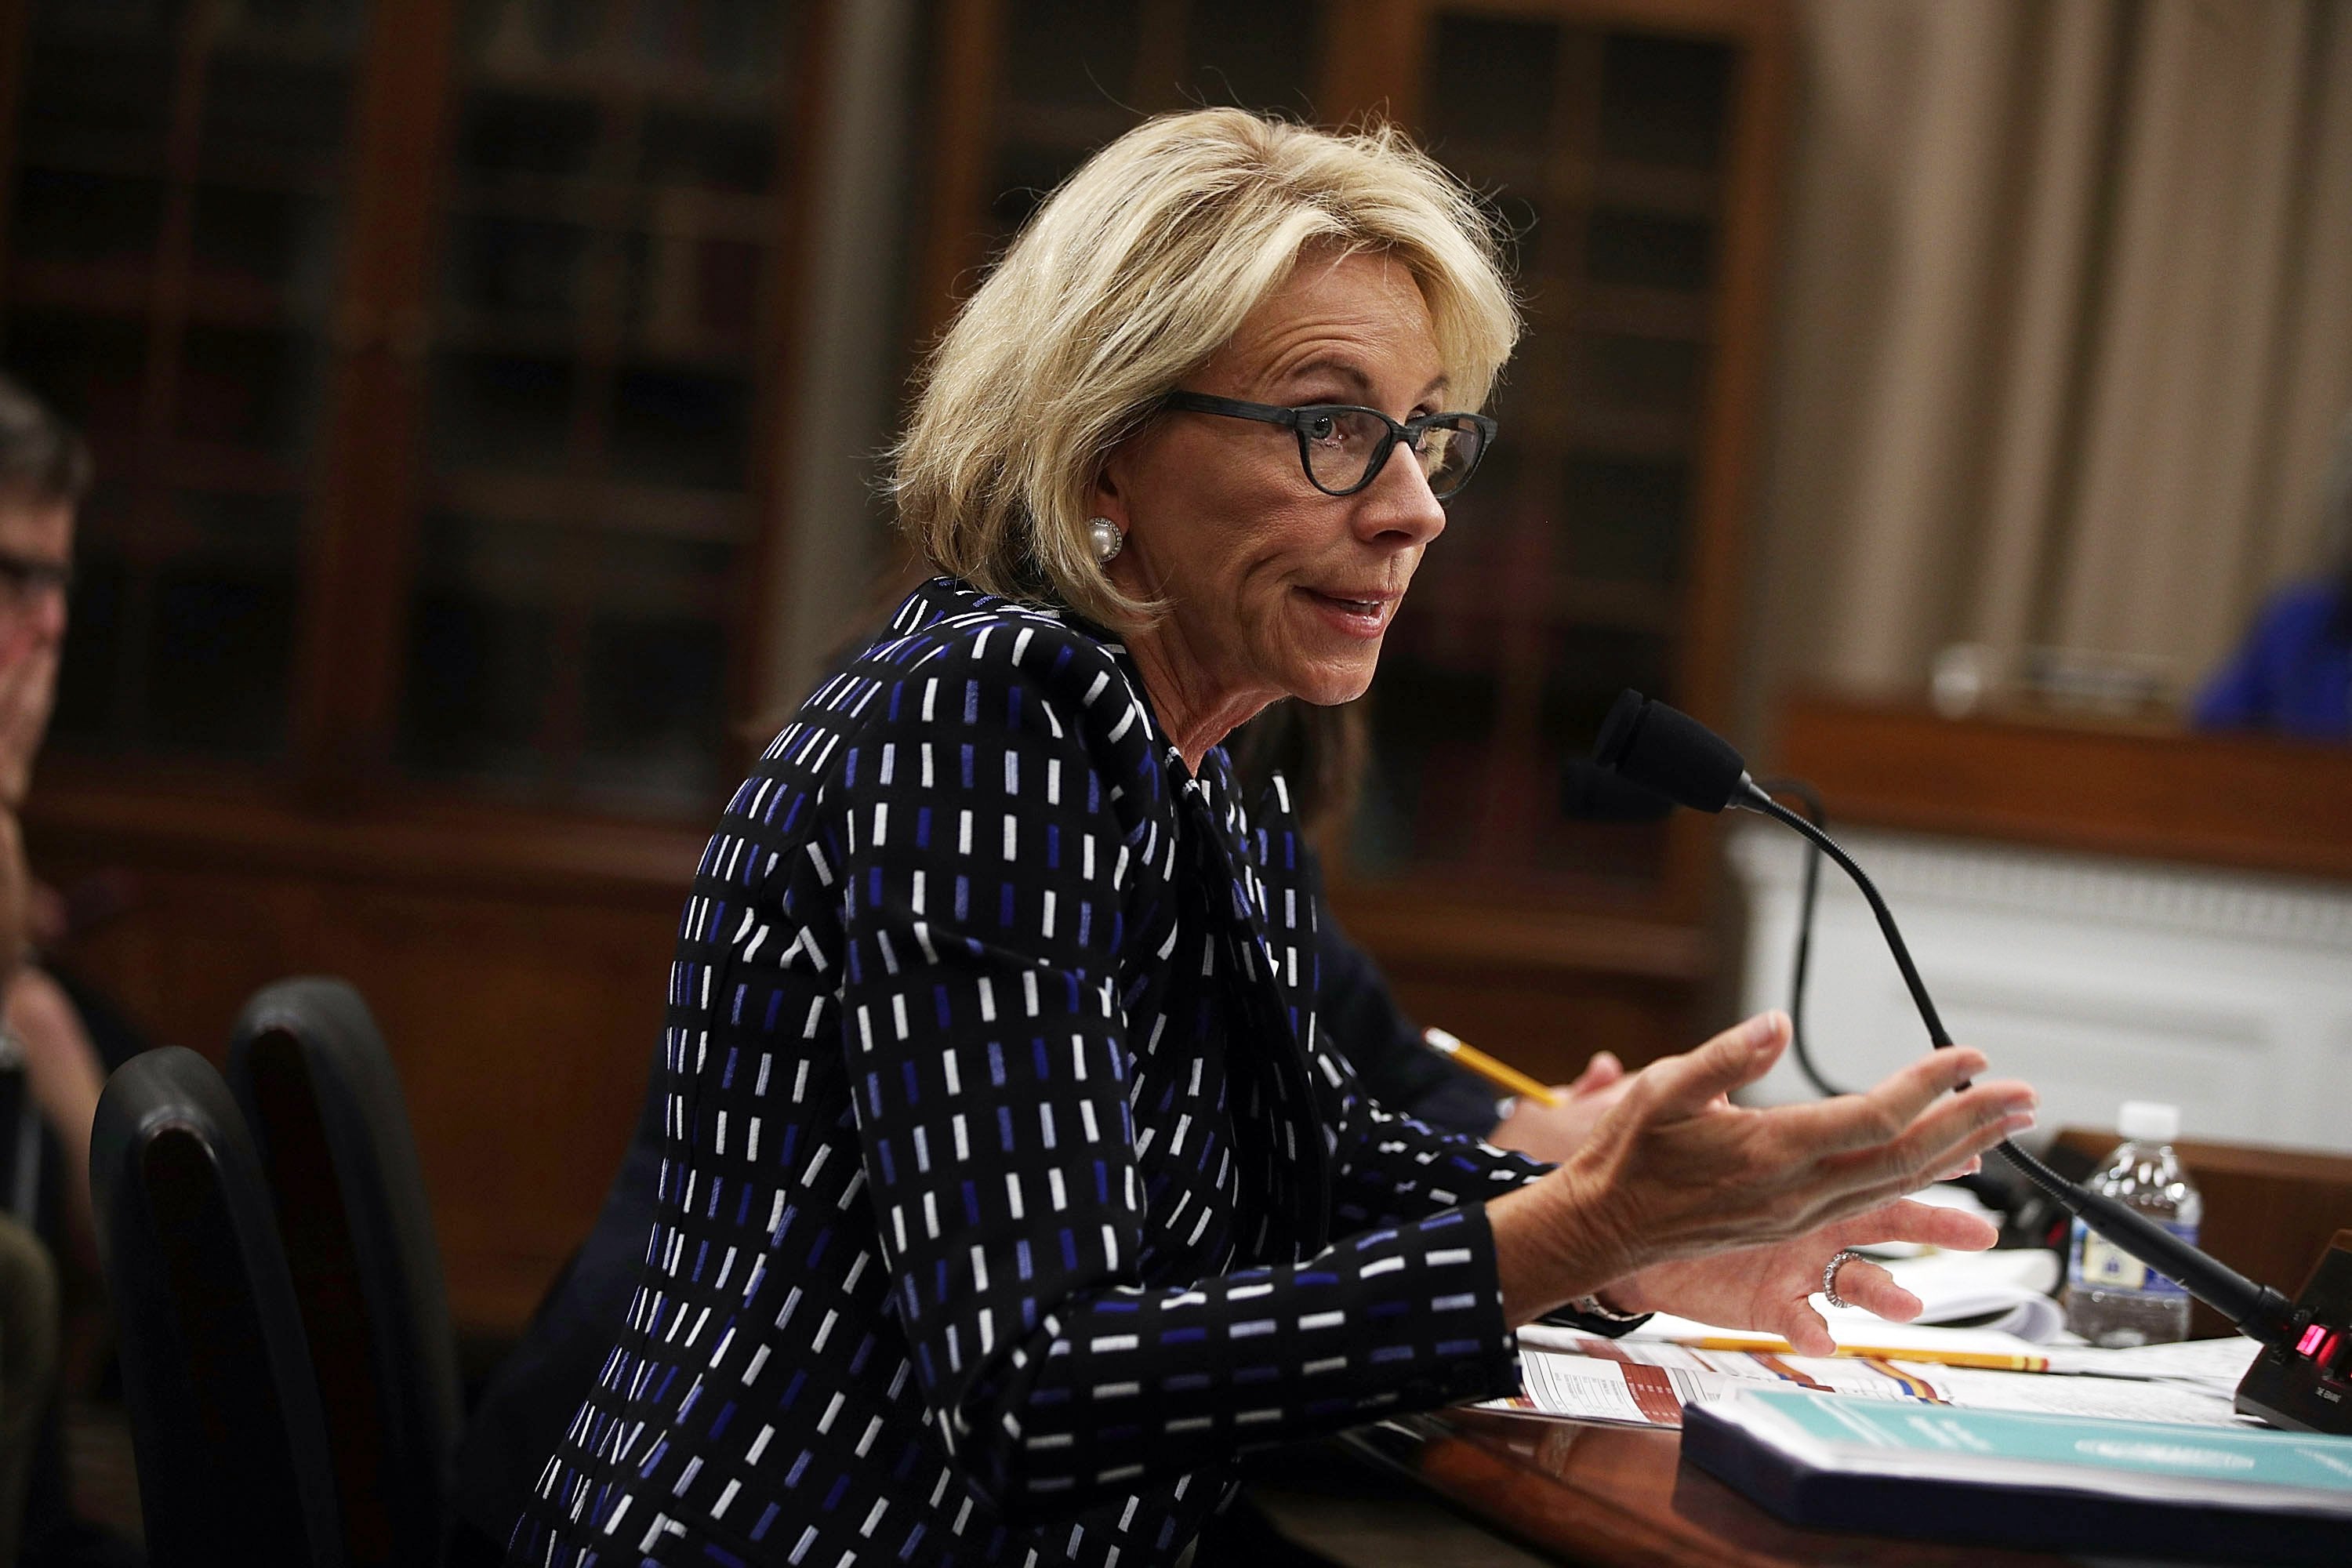 Betsy DeVos Wants To Spend Millions On School Vouchers Despite Studies Saying They Don't Actually Work
